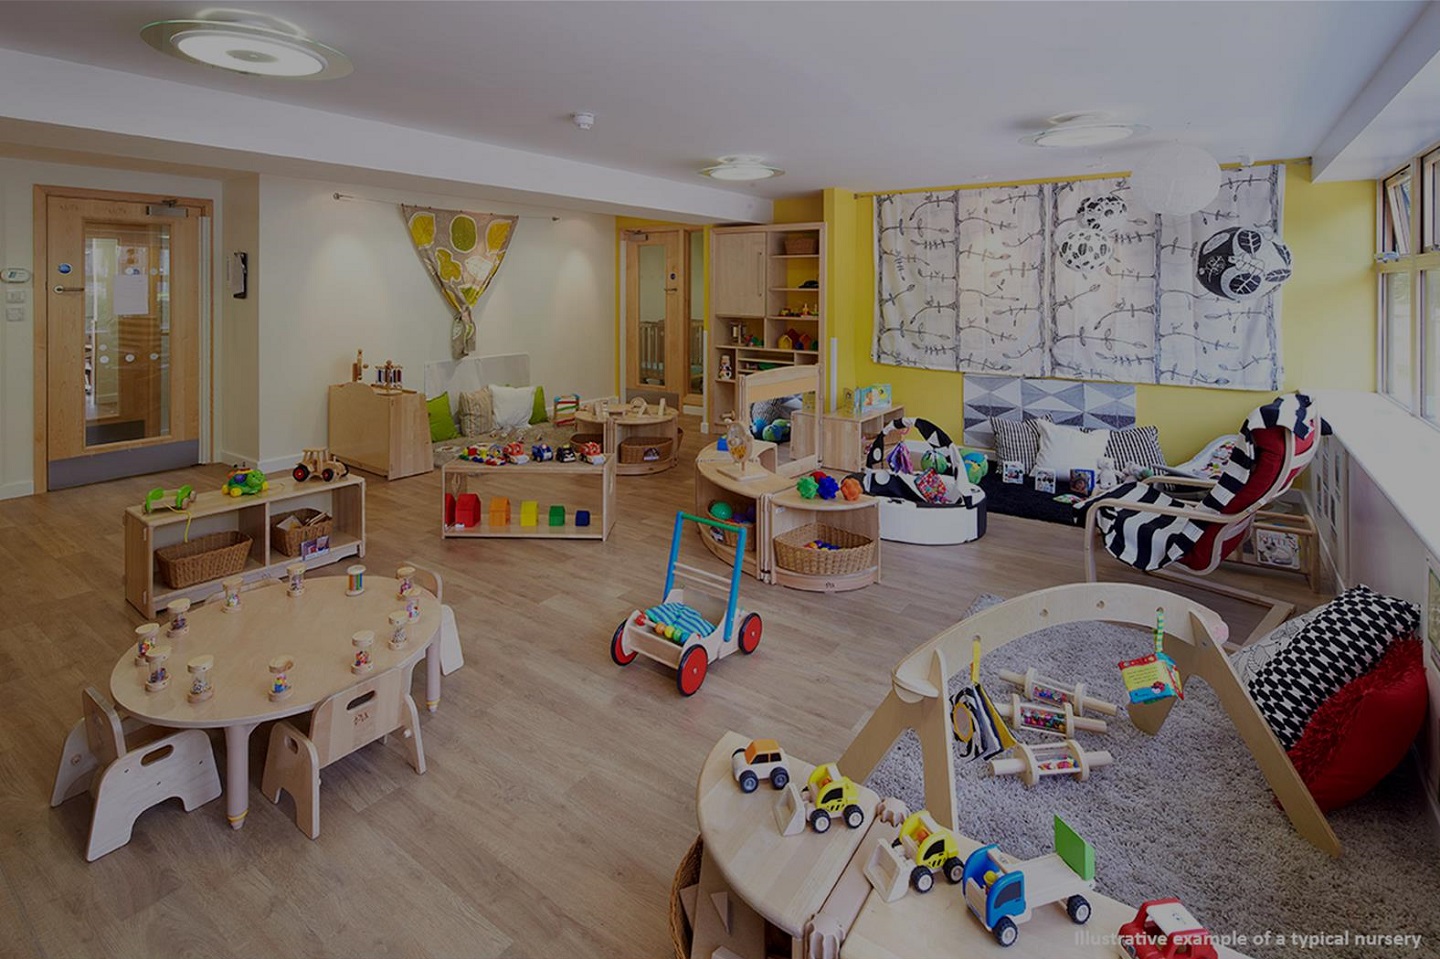 Bright Horizons St Swithin Early Learning and Childcare Aberdeen 03334 553765